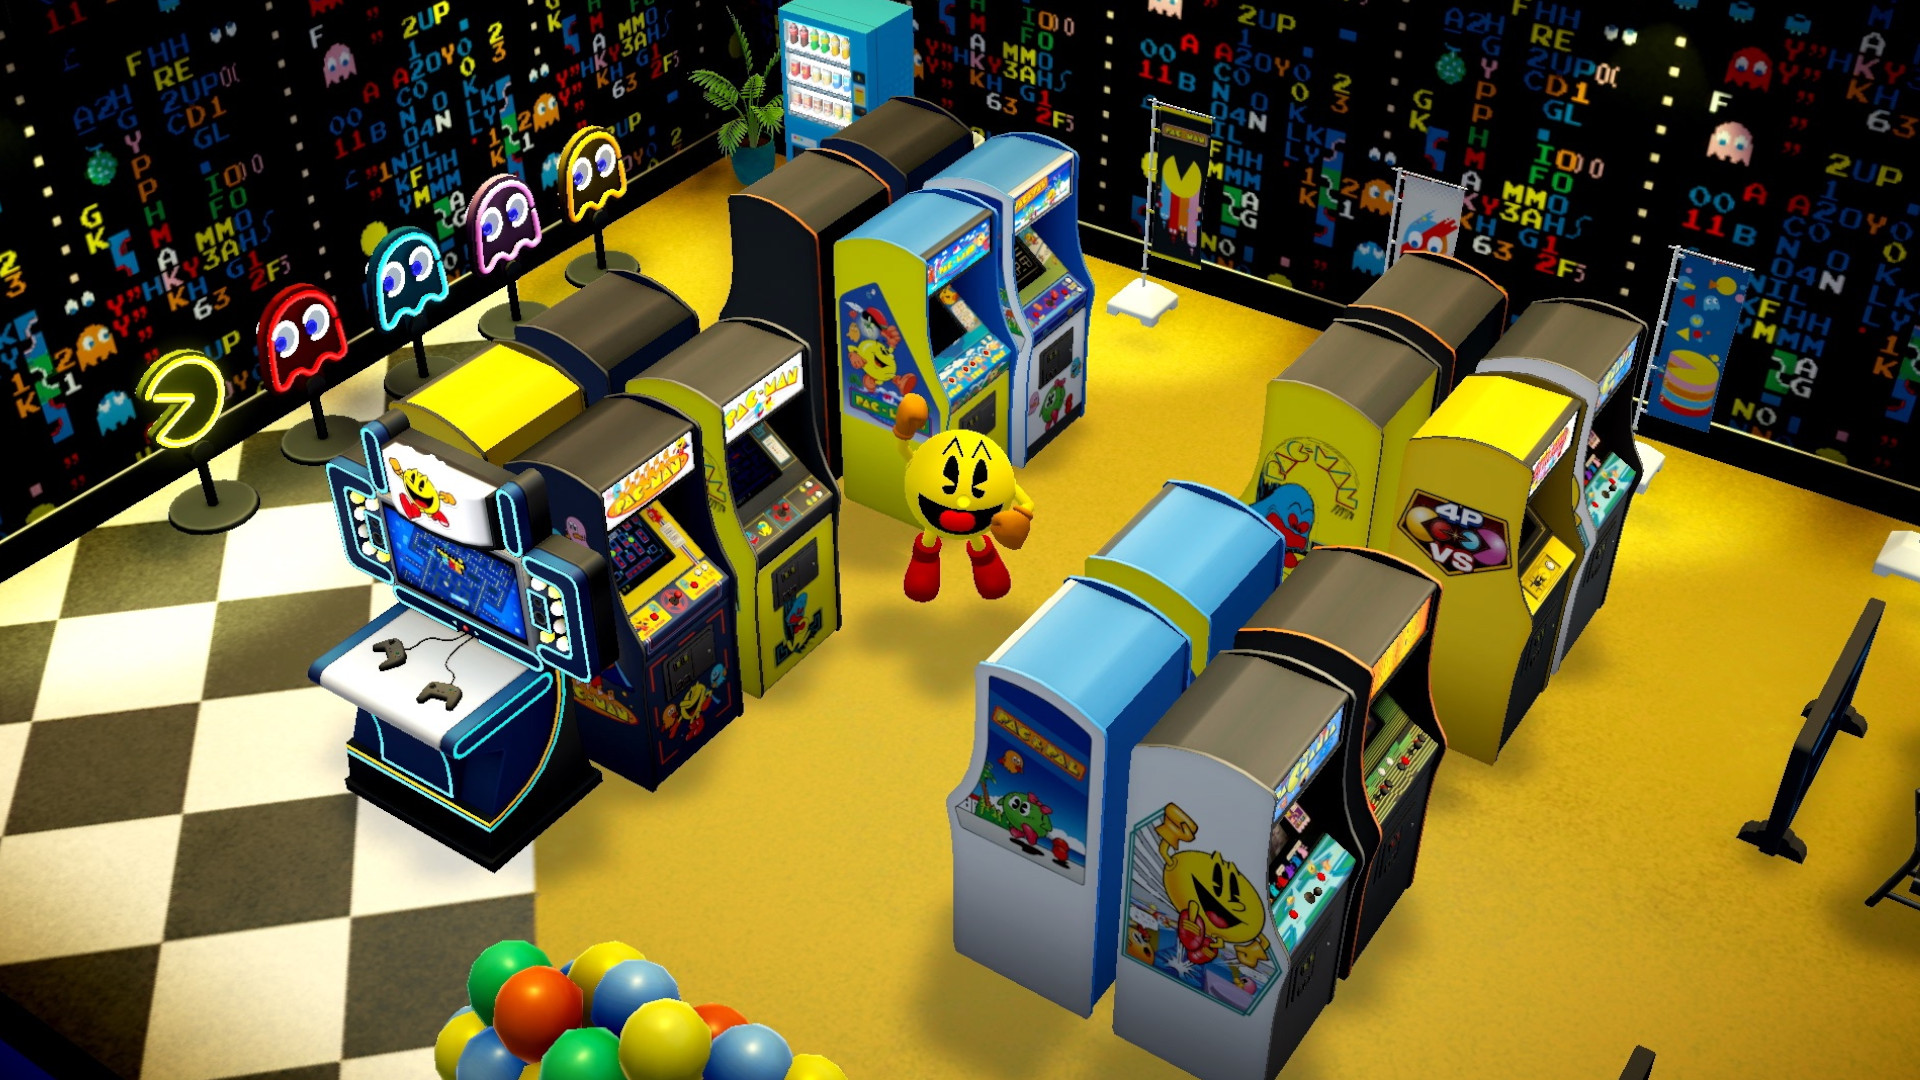 Play as Pac-Man playing Pac-Man and 13 other Pac-Man games in Pac-Man Museum+